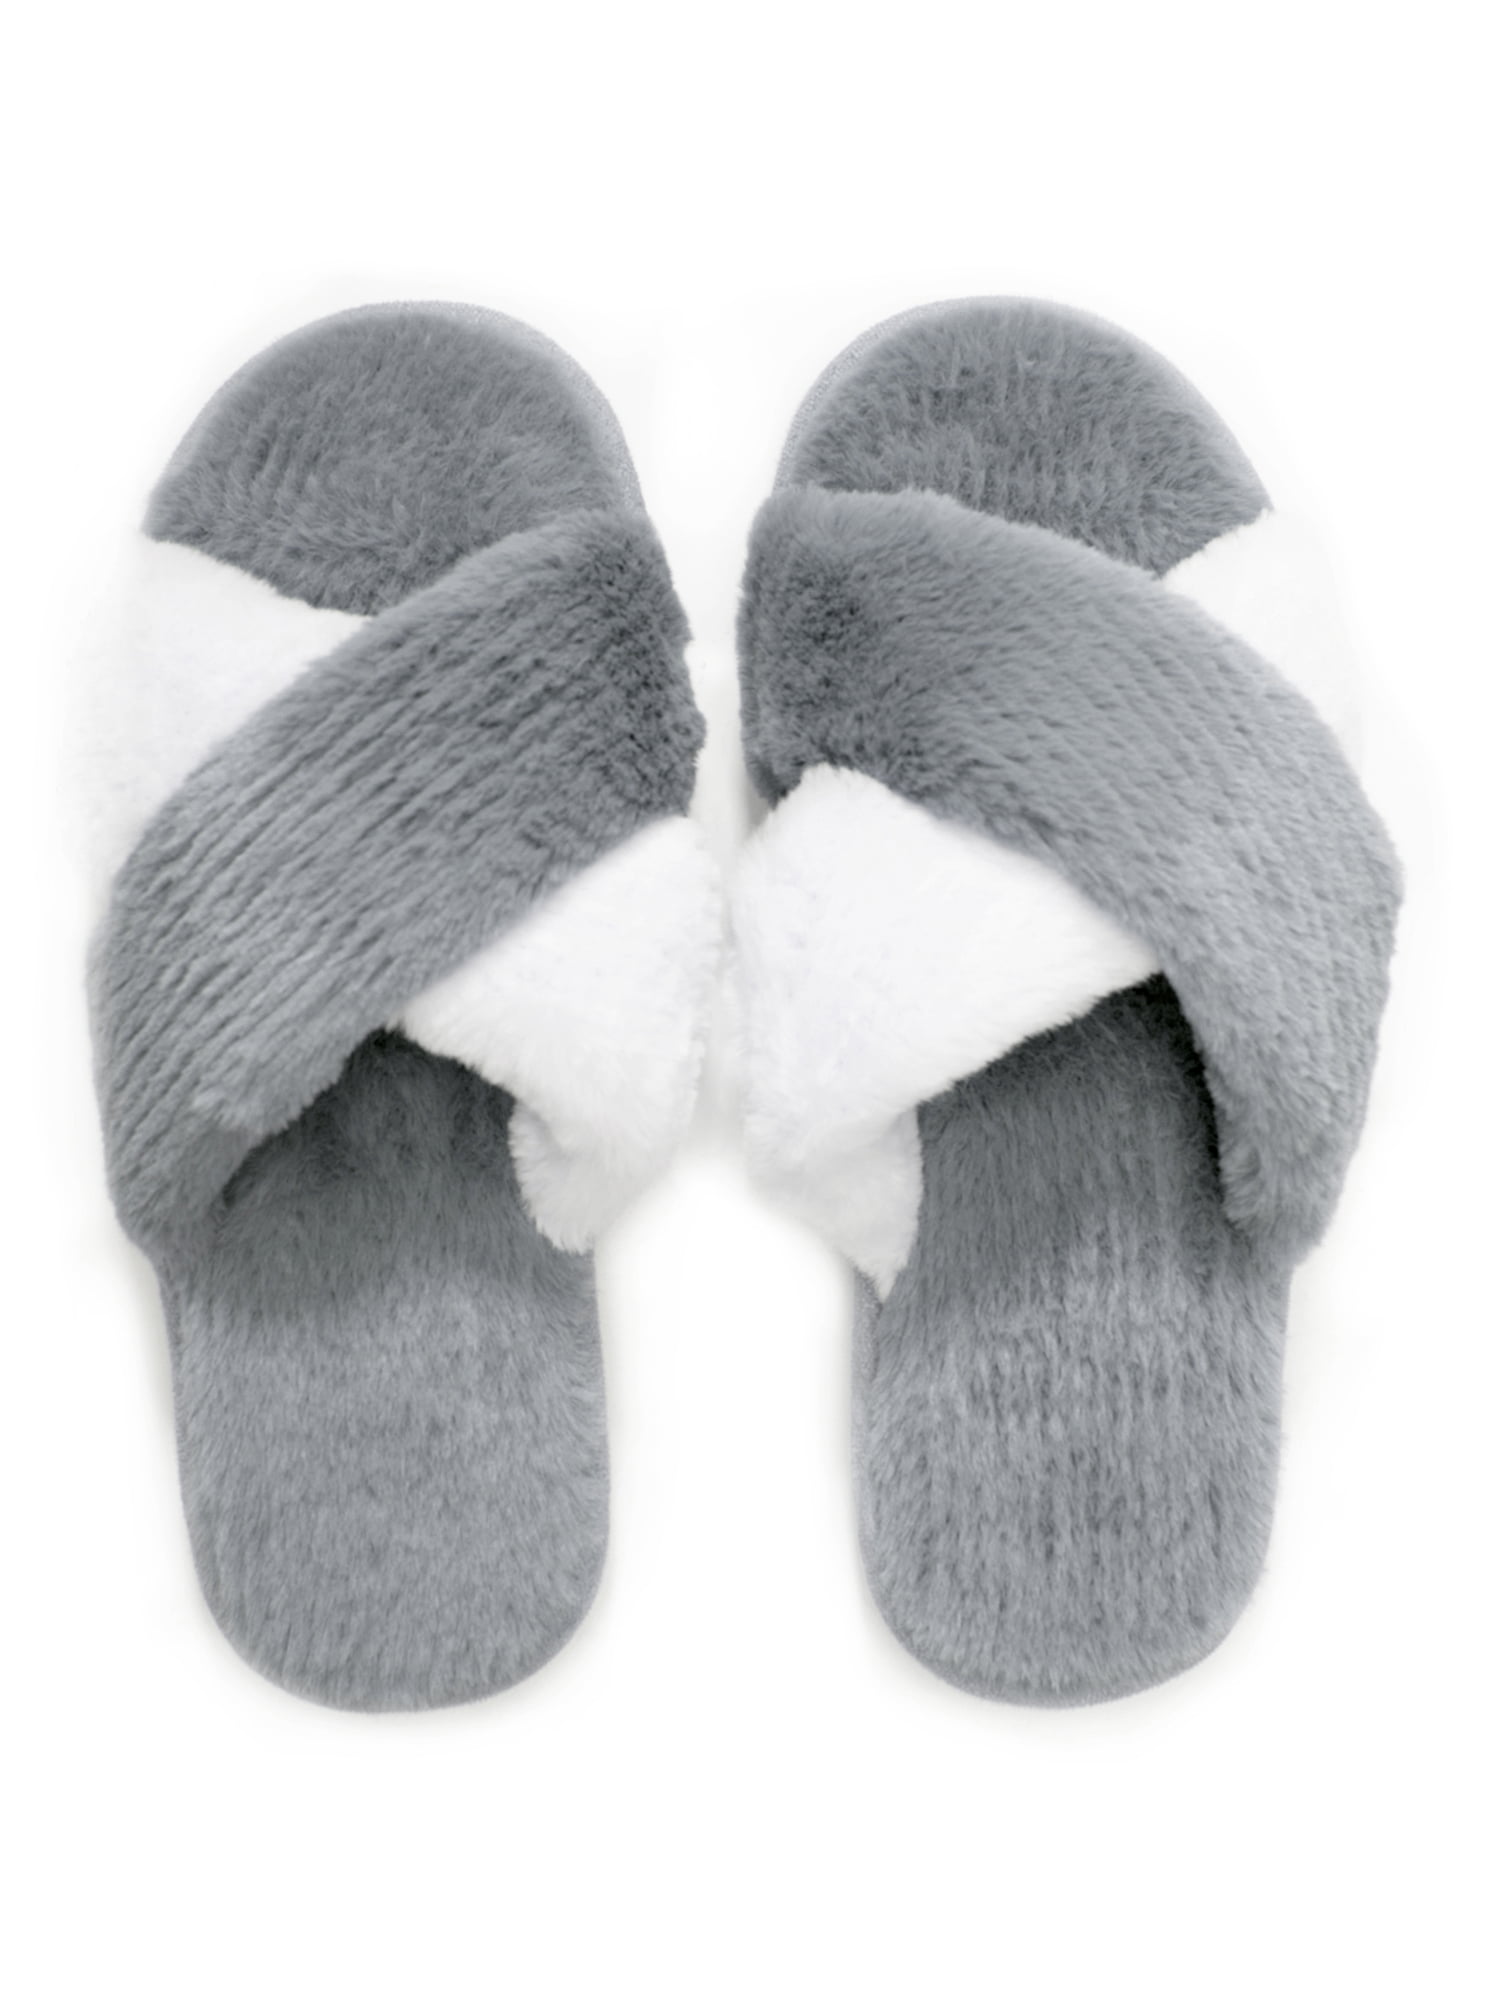 warm comfy slippers